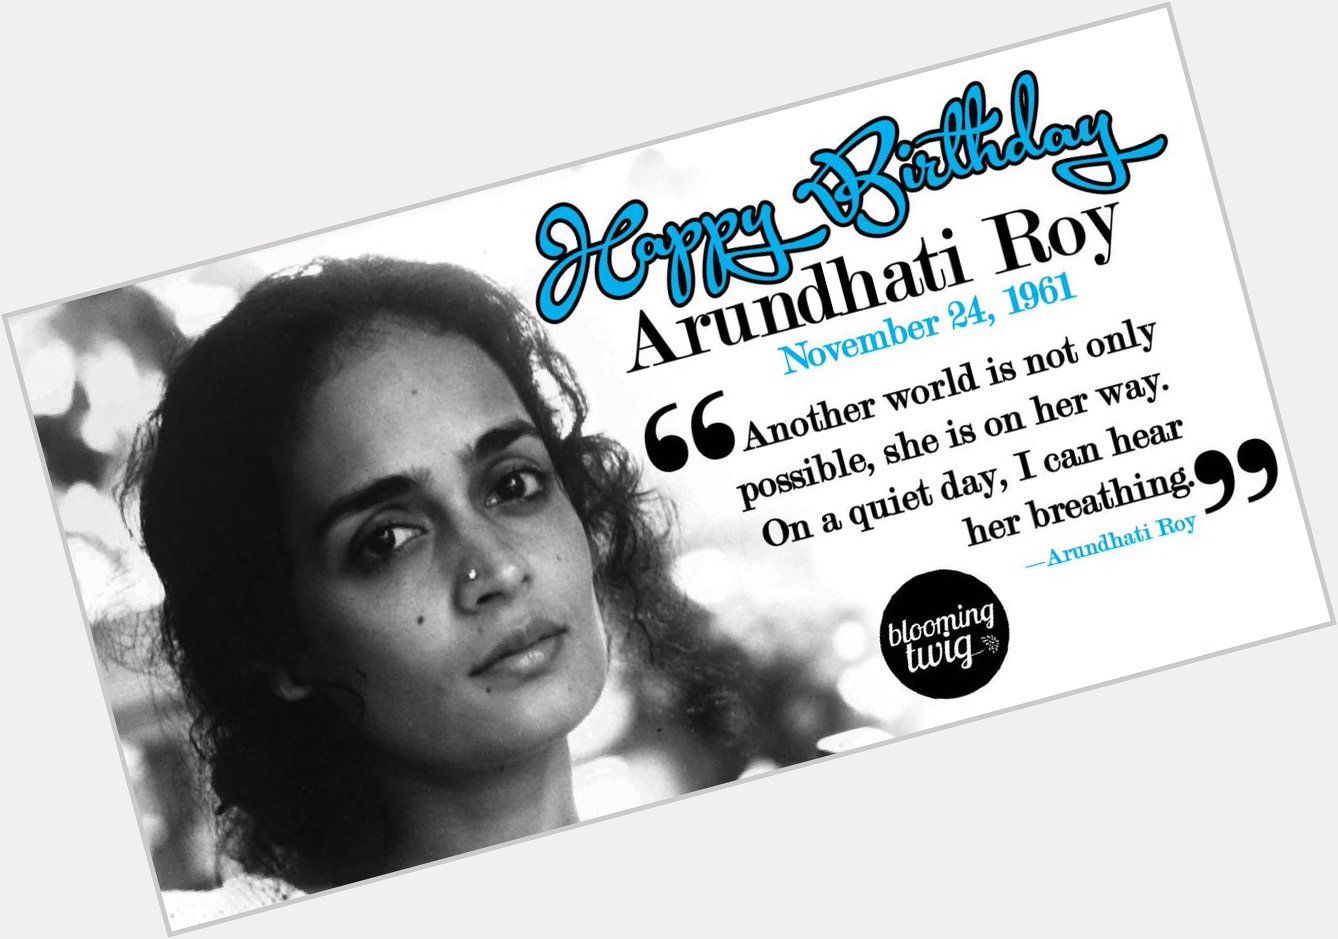 Happy Birthday to political activist and author of The God of Small Things Arundhati Roy! 